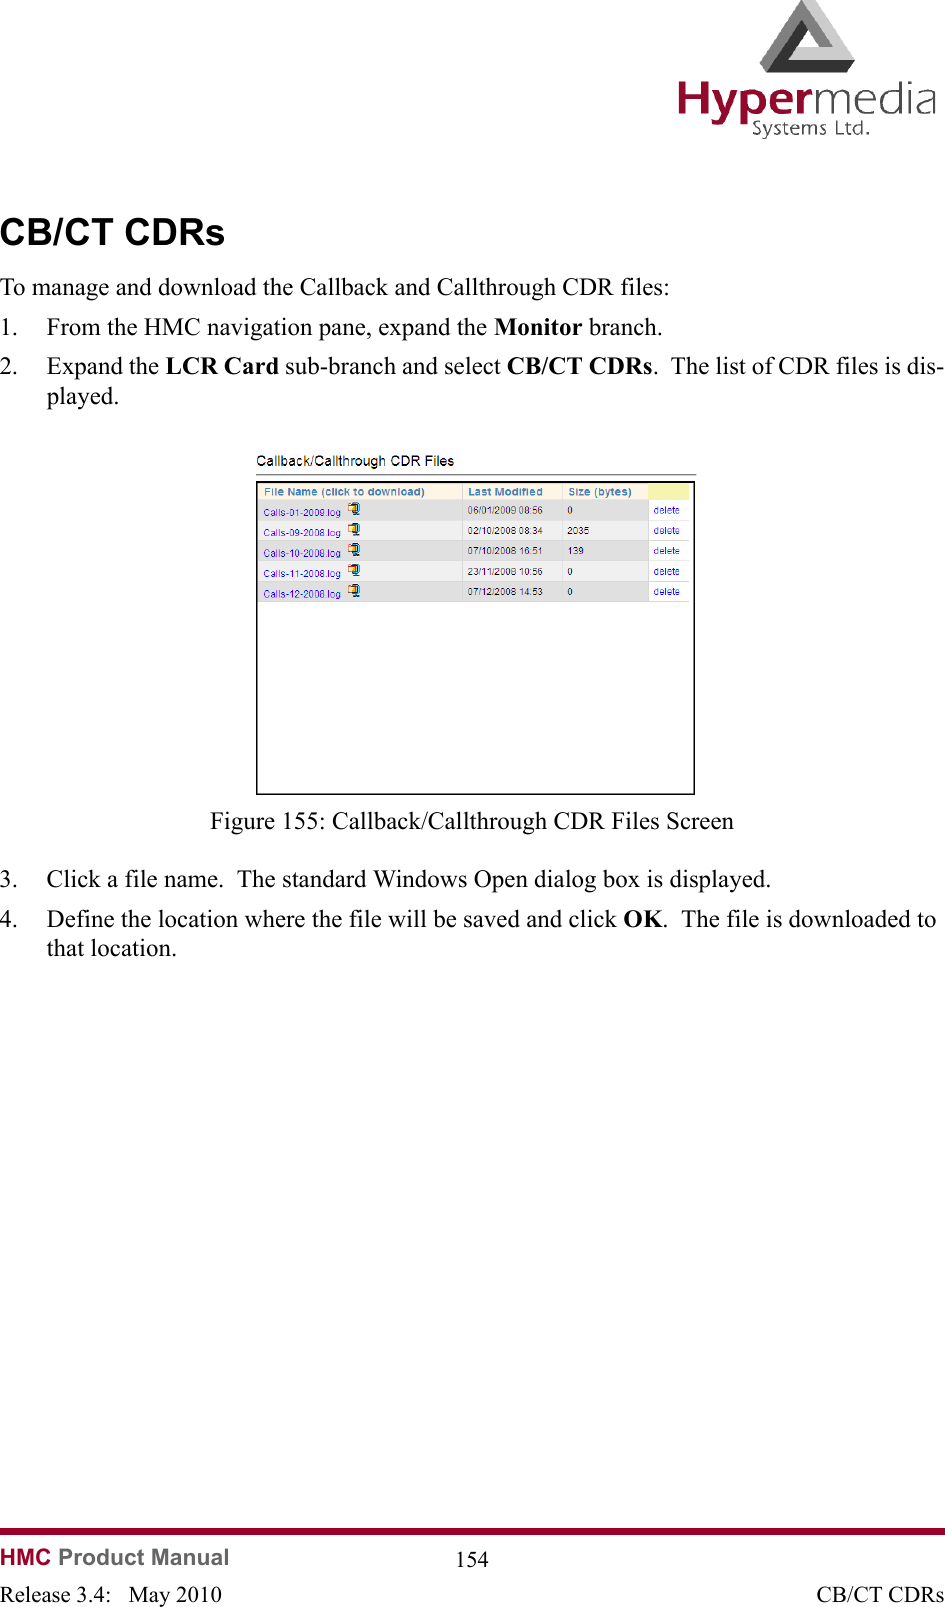   HMC Product Manual  154Release 3.4:   May 2010 CB/CT CDRsCB/CT CDRsTo manage and download the Callback and Callthrough CDR files:1. From the HMC navigation pane, expand the Monitor branch.2. Expand the LCR Card sub-branch and select CB/CT CDRs.  The list of CDR files is dis-played.              Figure 155: Callback/Callthrough CDR Files Screen3. Click a file name.  The standard Windows Open dialog box is displayed.4. Define the location where the file will be saved and click OK.  The file is downloaded to that location.